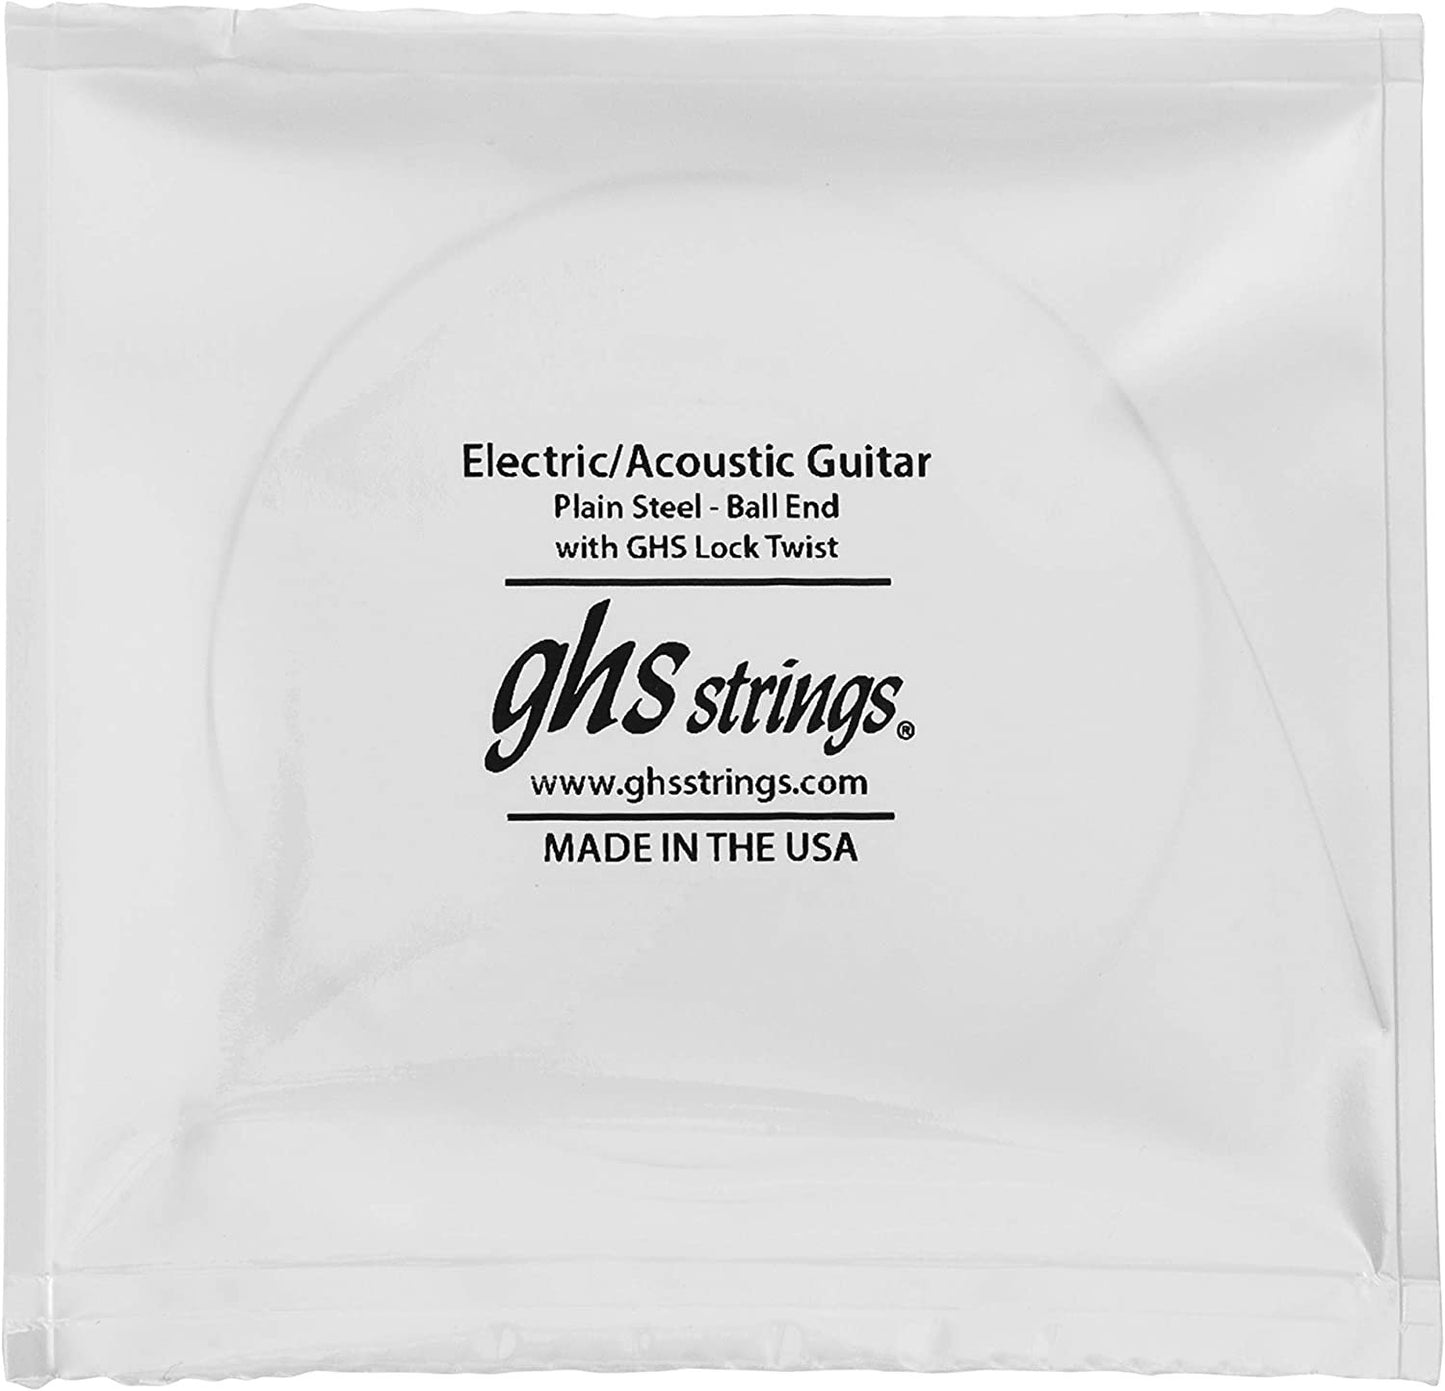 GHS Strings GB9 1/2 Guitar Boomers, Nickel-Plated Electric Guitar Strings, Extra Light + (.009 1/2-.044)